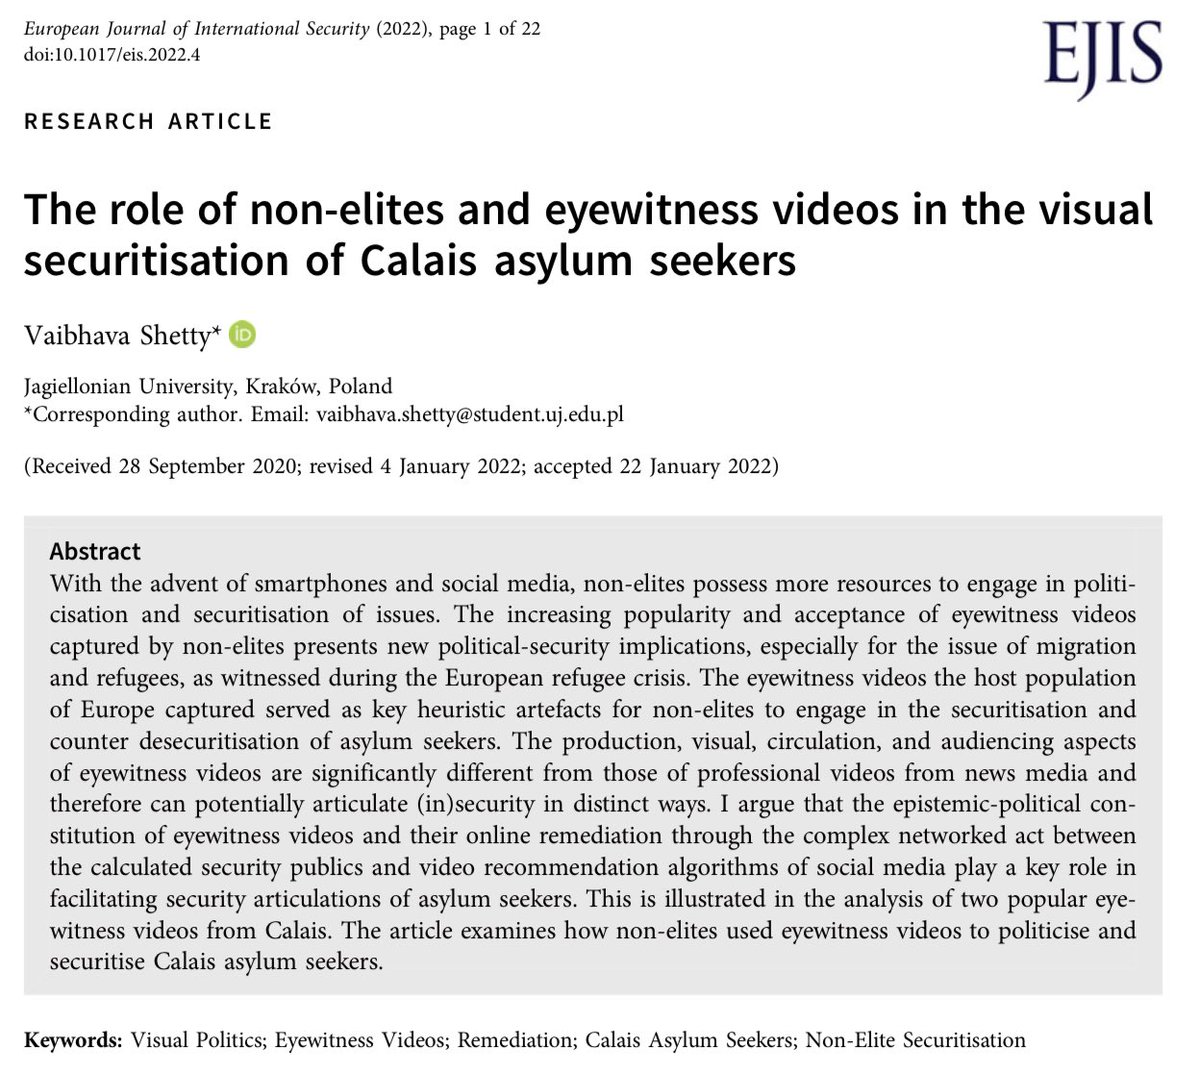 New and open-access in @EJIntSec: interesting essay by @vaibhavashetty on how amateur eyewitness videos, ciruclating through social media, play important roles in depicting and shaping encounters between asylum seekers and host populations. cambridge.org/core/journals/…